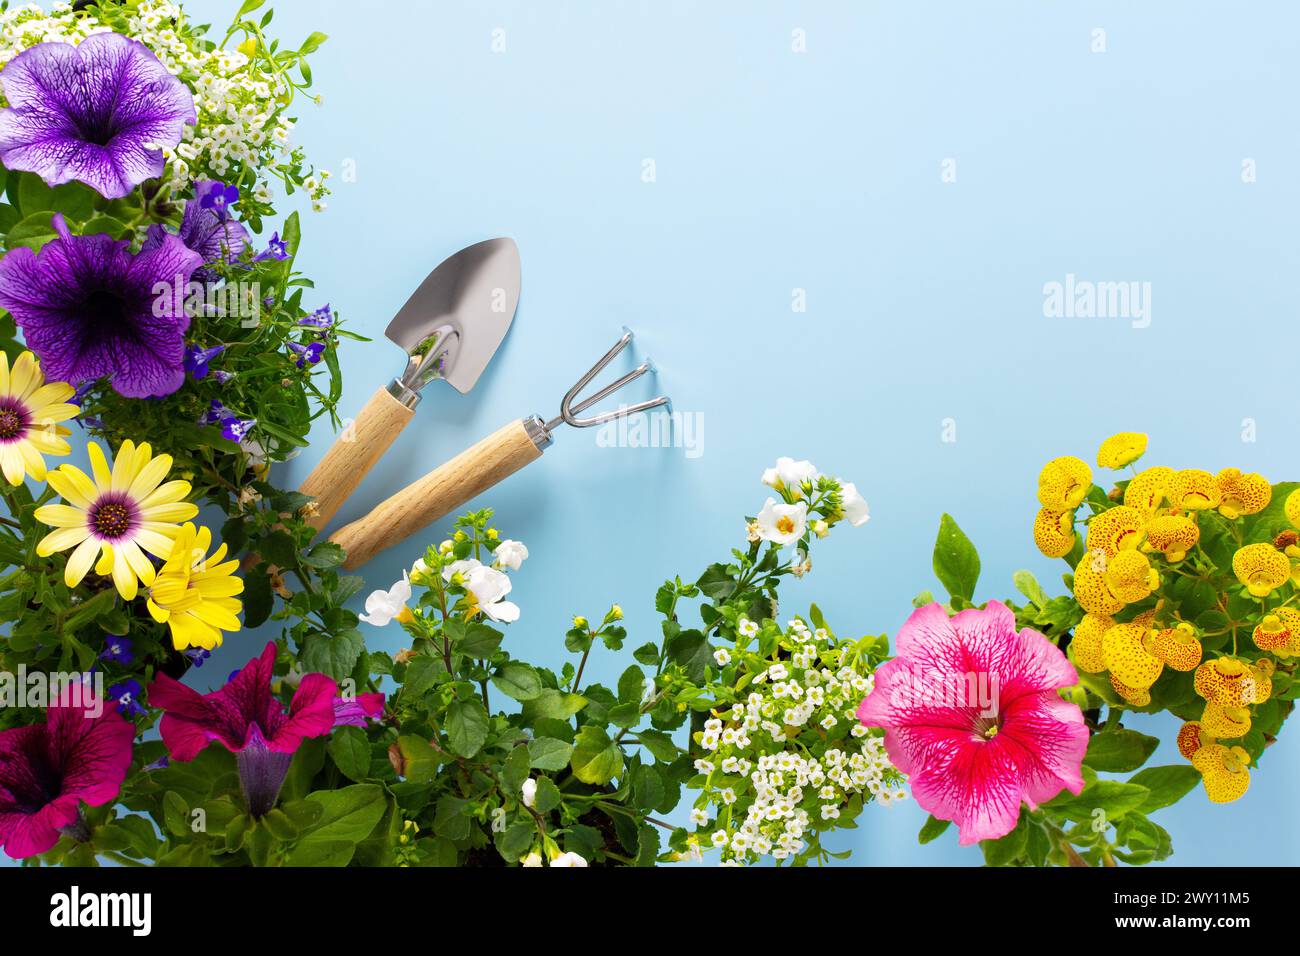 Spring decoration of a home balcony or terrace with flowers, Lobelia and Alyssum, Bacopa and Petunia, Calceolaria and Osteospermum on a blue backgroun Stock Photo